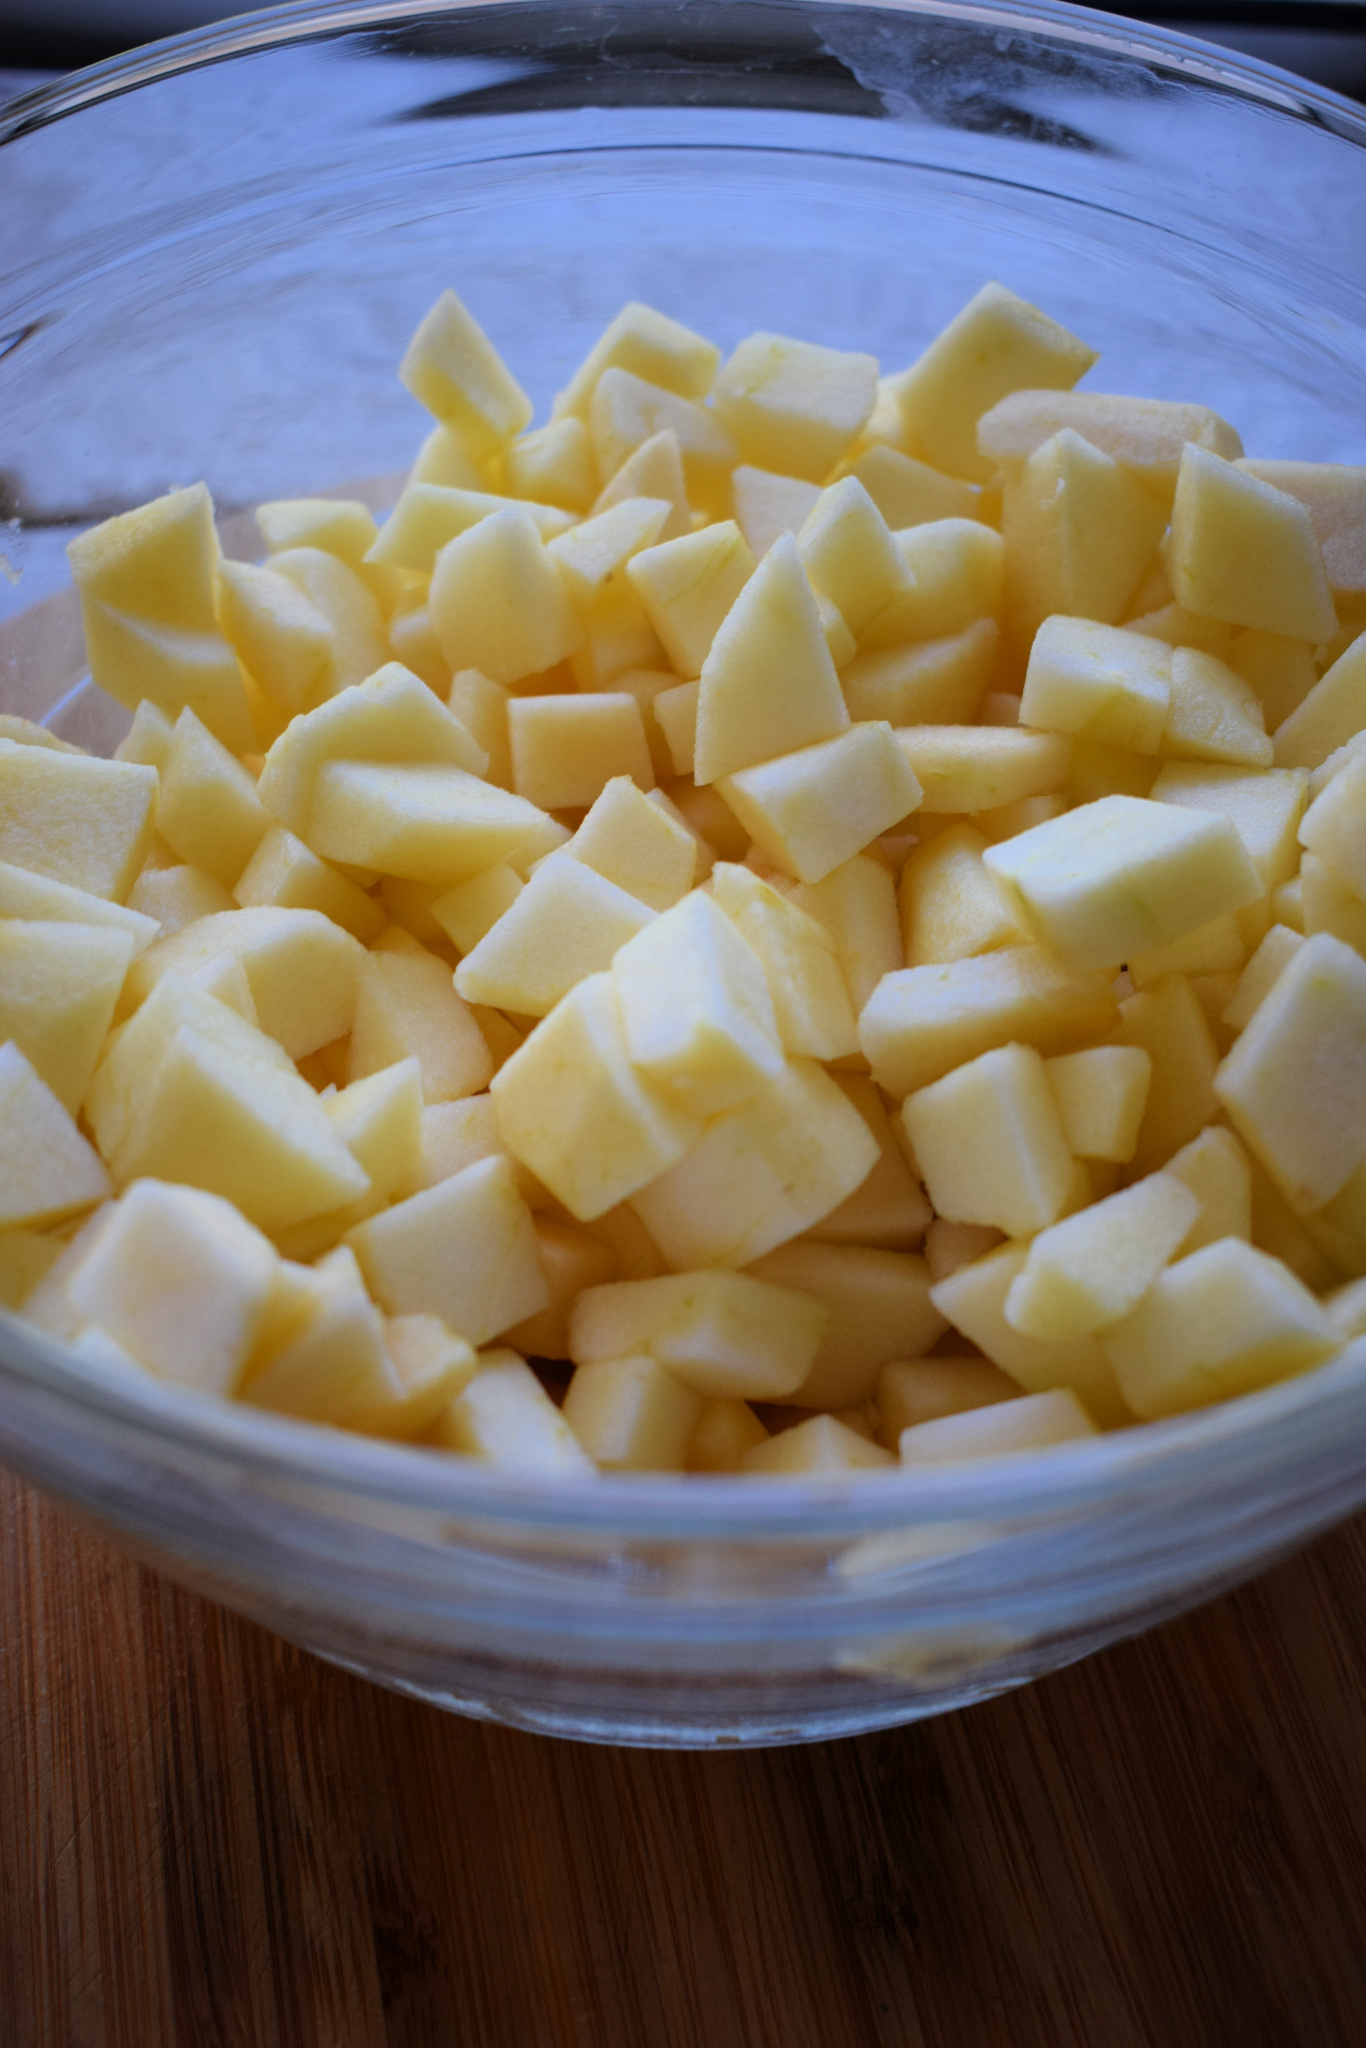 Diced apples in a glass bowl.